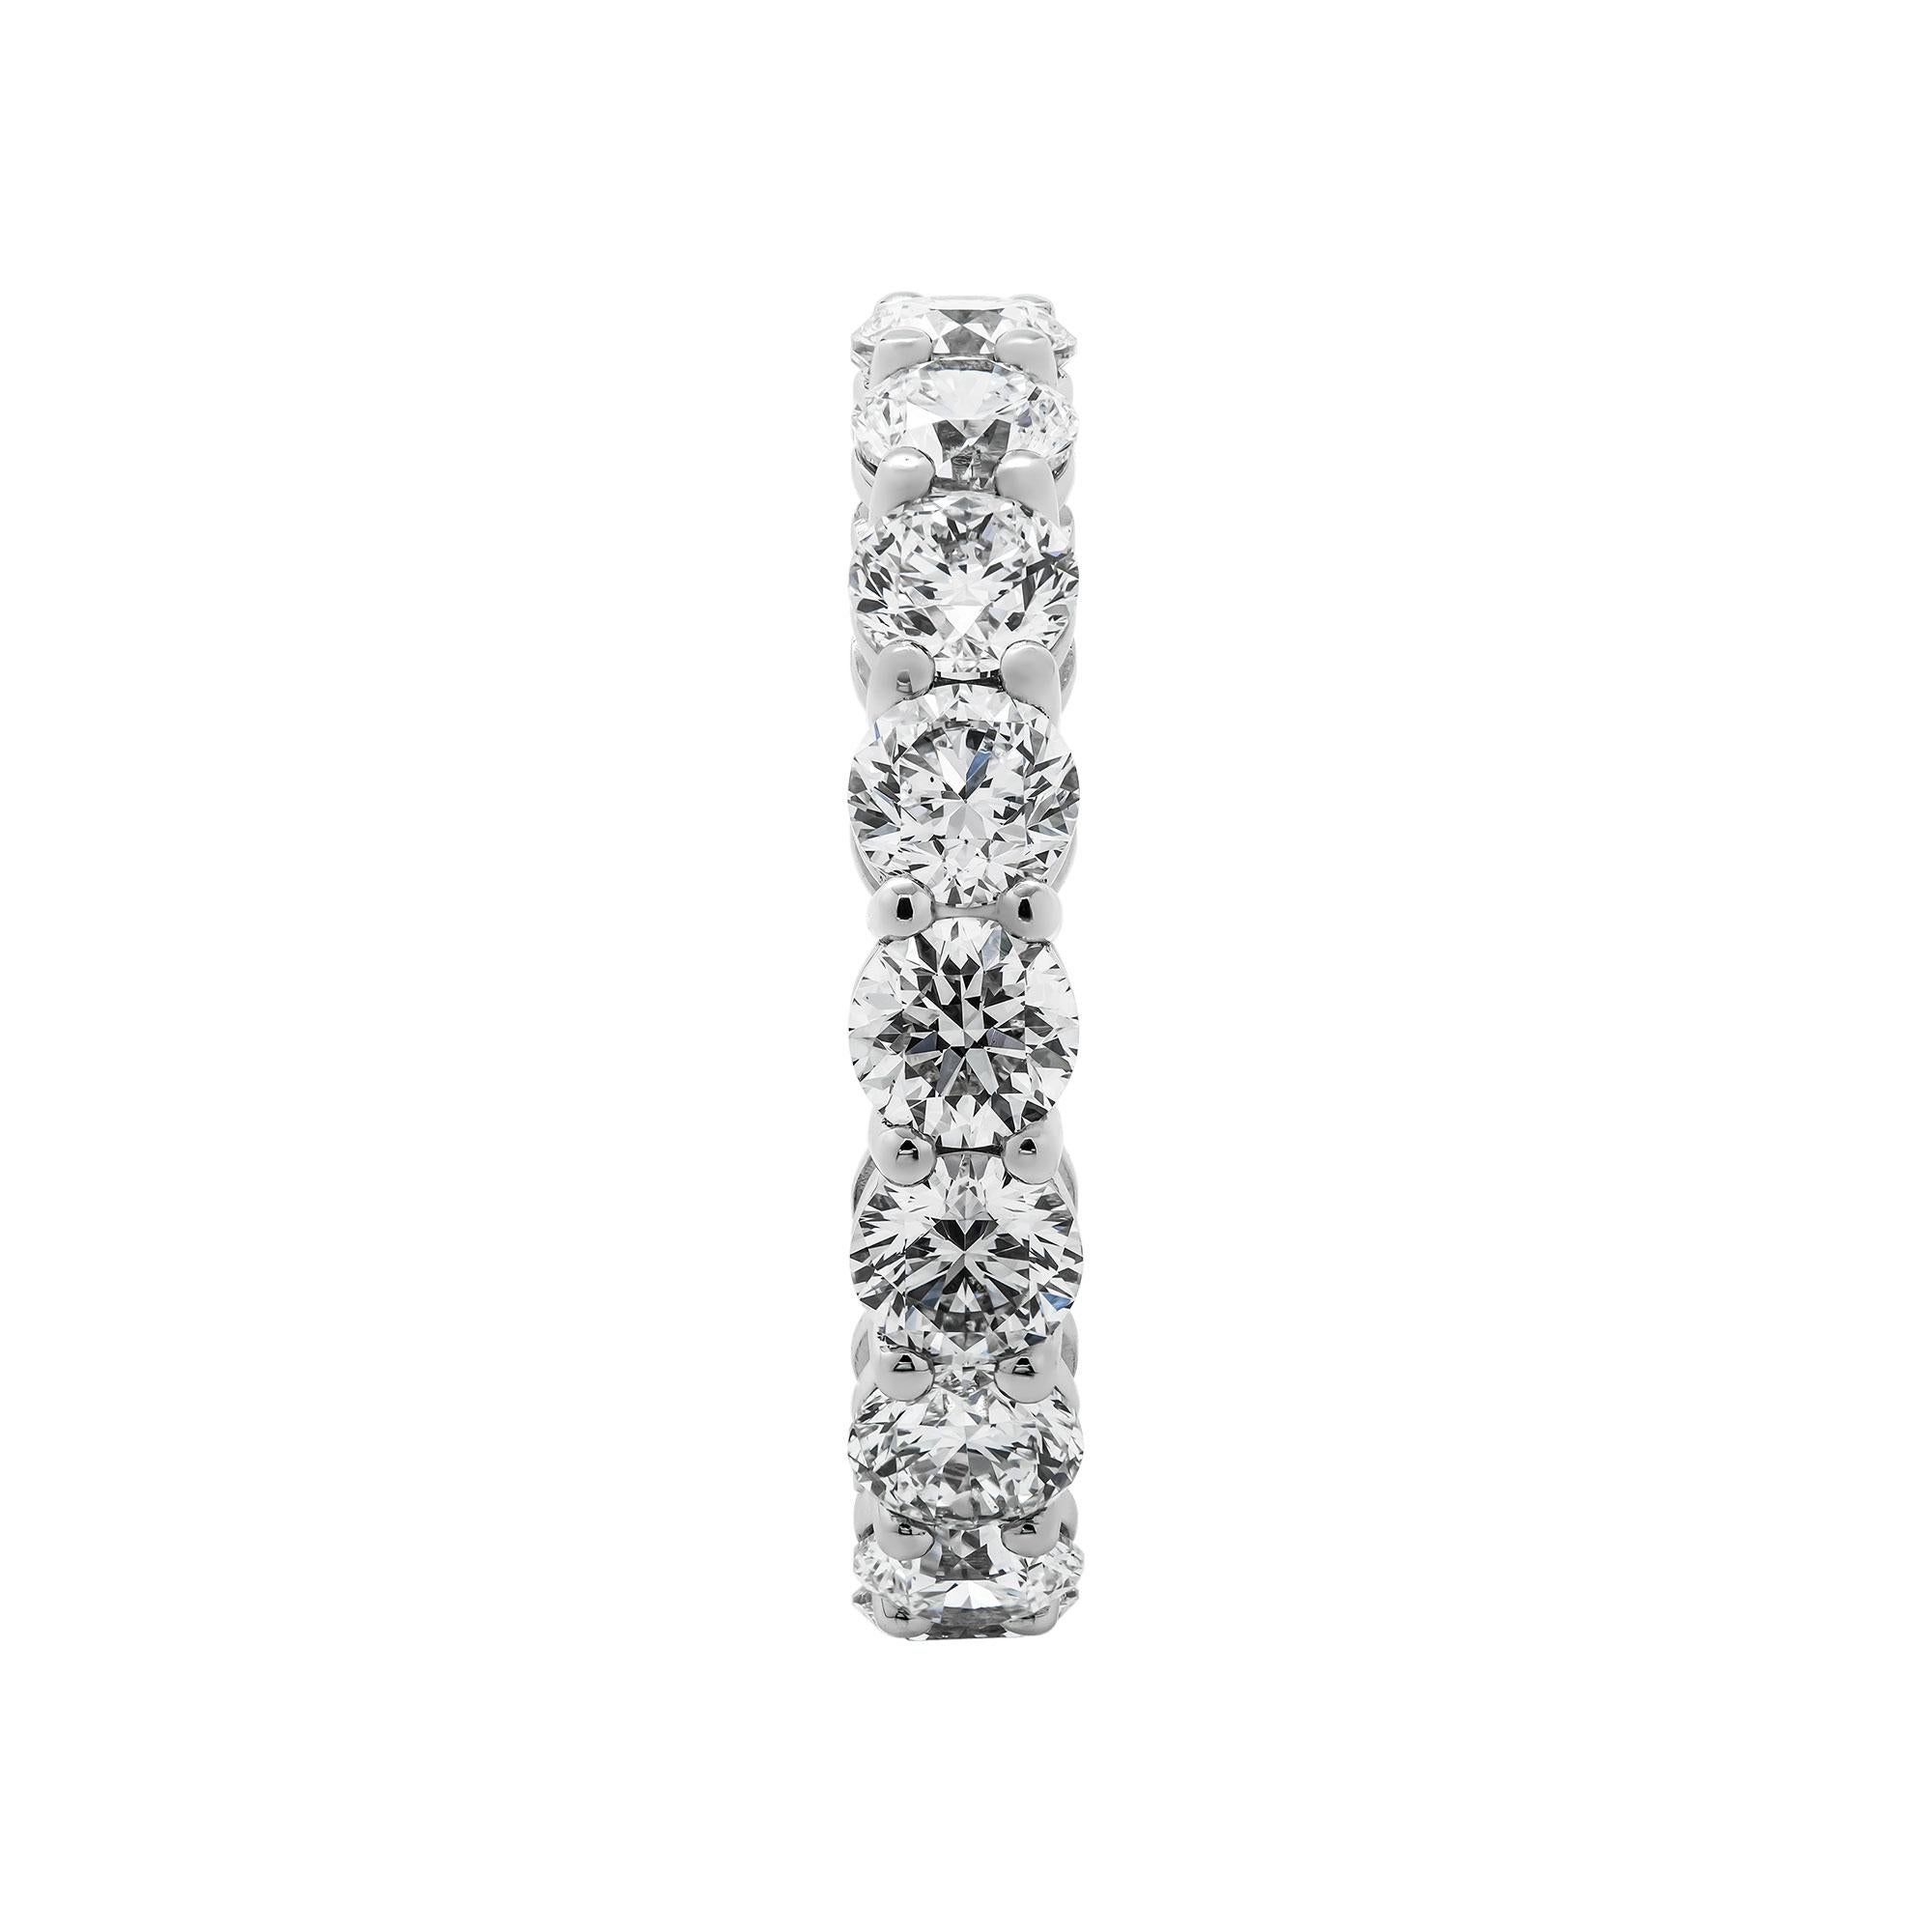 Eternity band with 4 Carat Round Cut Diamonds
Mounted in Platinum 950, 17 Round diamonds won't miss a sparkle! - most wanted shape of the stone fore anniversary band
Beautiful cut, bold and classy, can be worn as a wedding band next to your